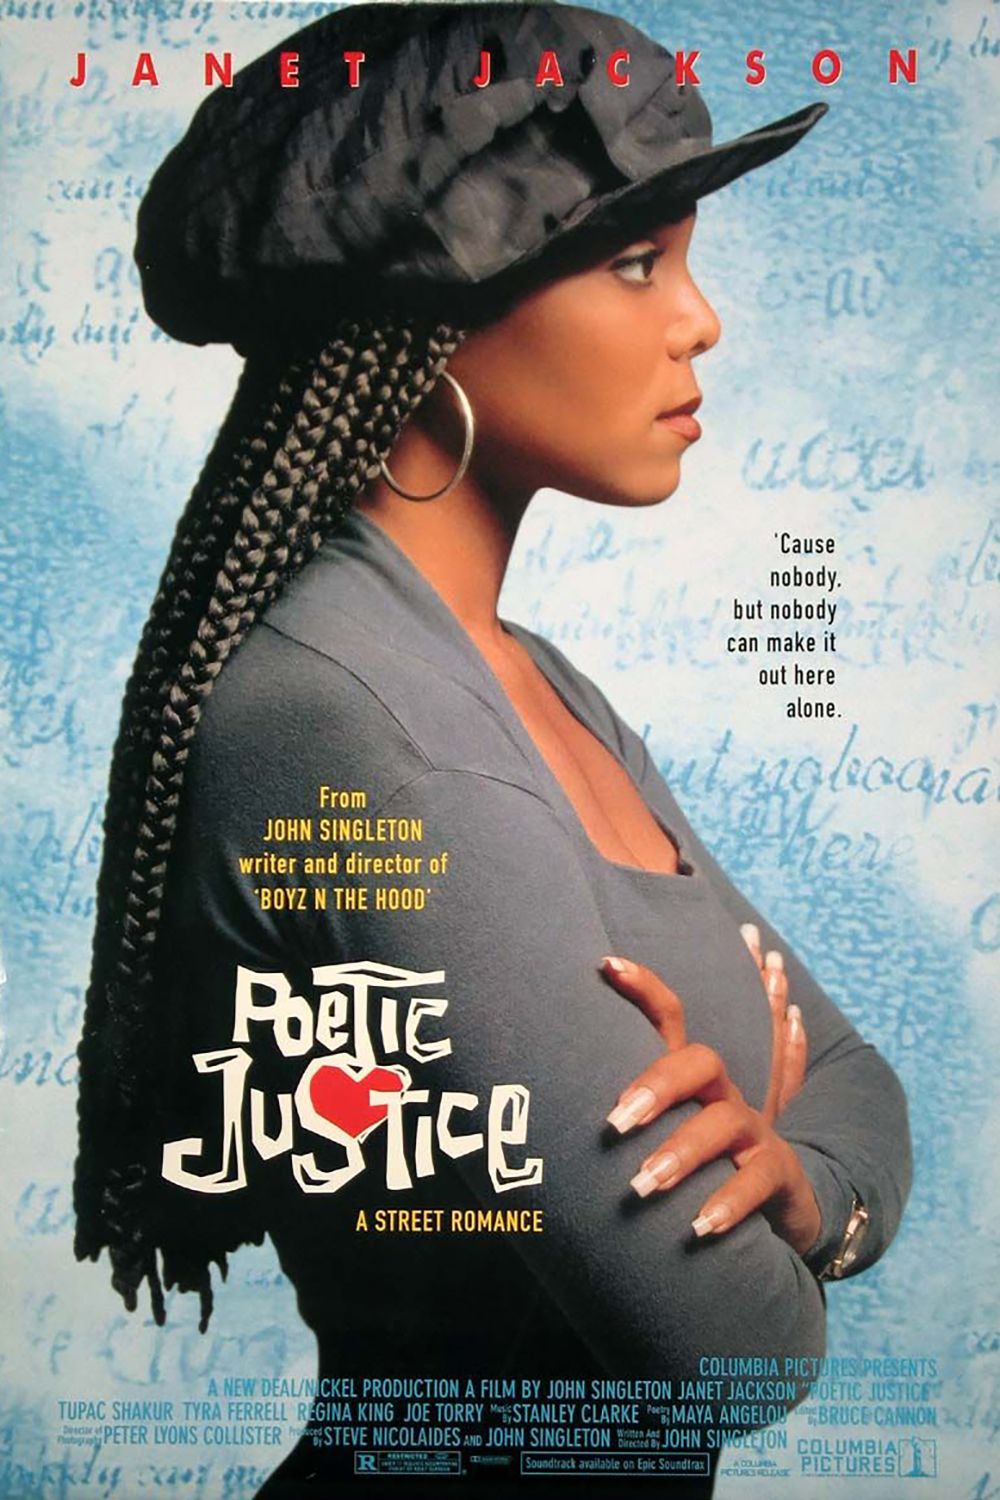 Poetic Justice Porn Scene - 35 Best 90s Movies of All Time - Most Iconic Nineties Films ...